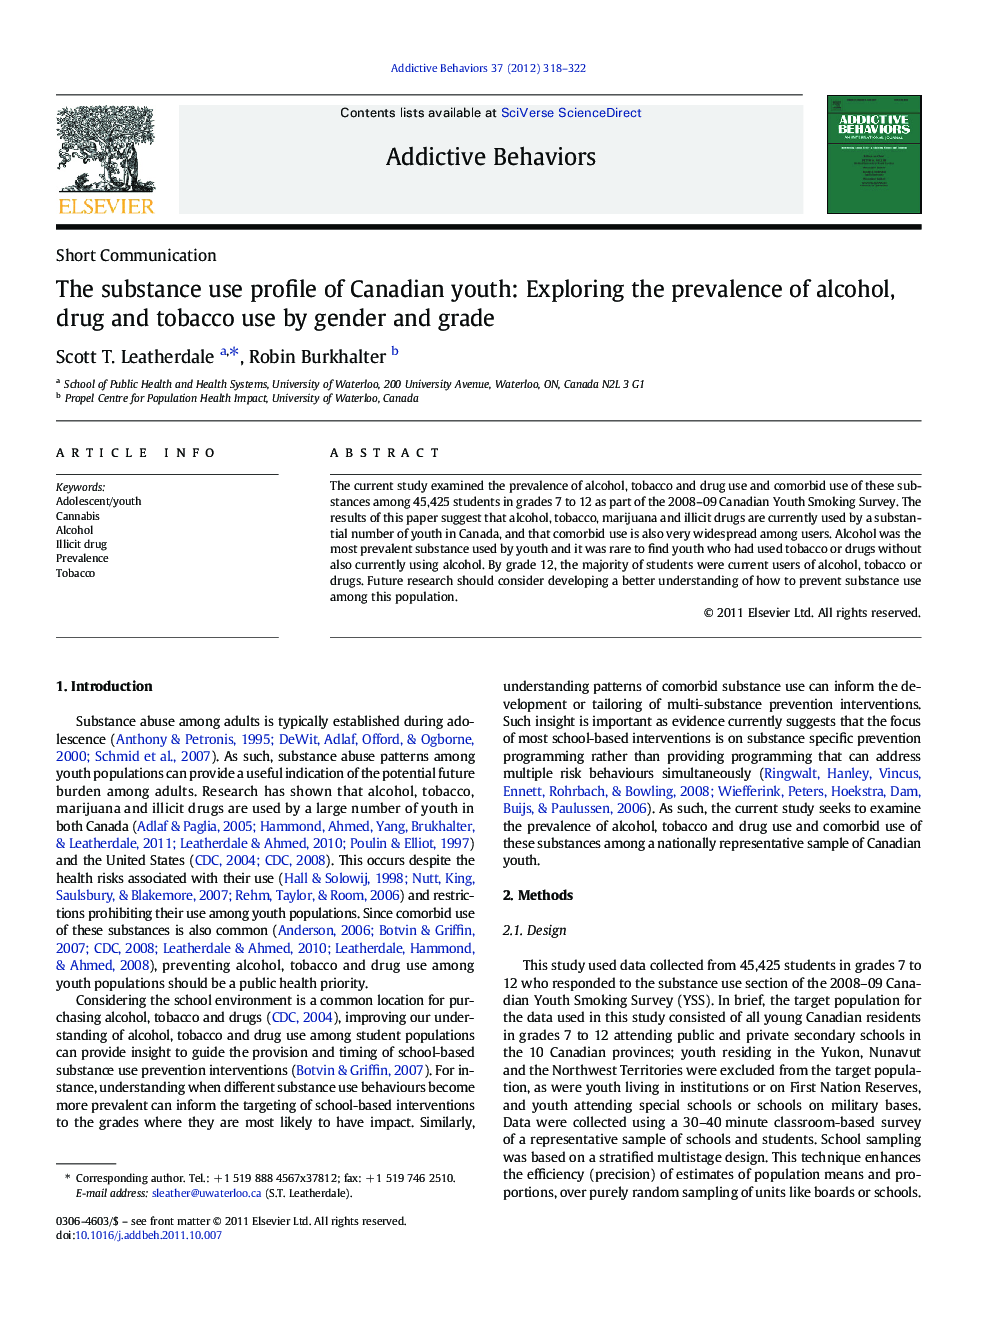 The substance use profile of Canadian youth: Exploring the prevalence of alcohol, drug and tobacco use by gender and grade